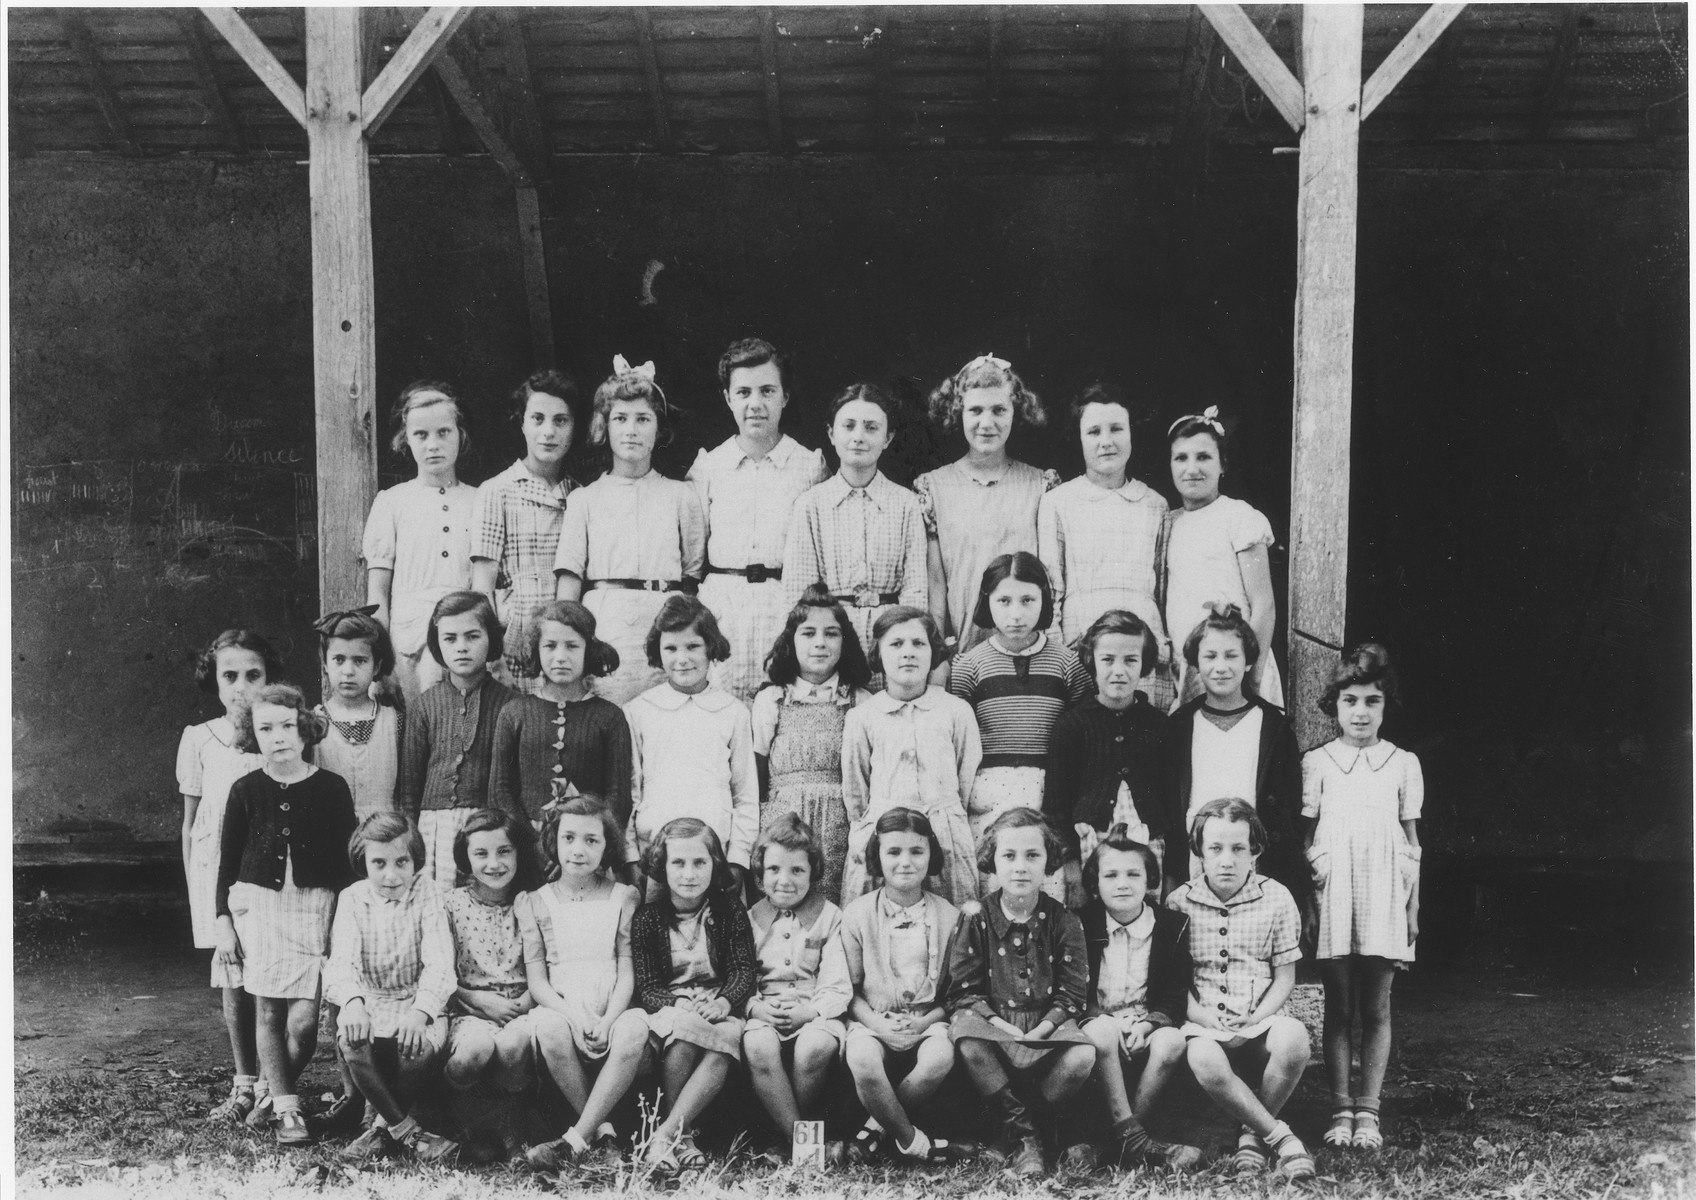 Jewish refugee children pose with their French classmates at a village school in Eauze, France.

Among those pictured are Berthe Silber (second row, second from the left); and Edith Steinfeld (standing third from the right).  Edith was subsequently deported to Auschwitz on convoy #29 from Drancy.